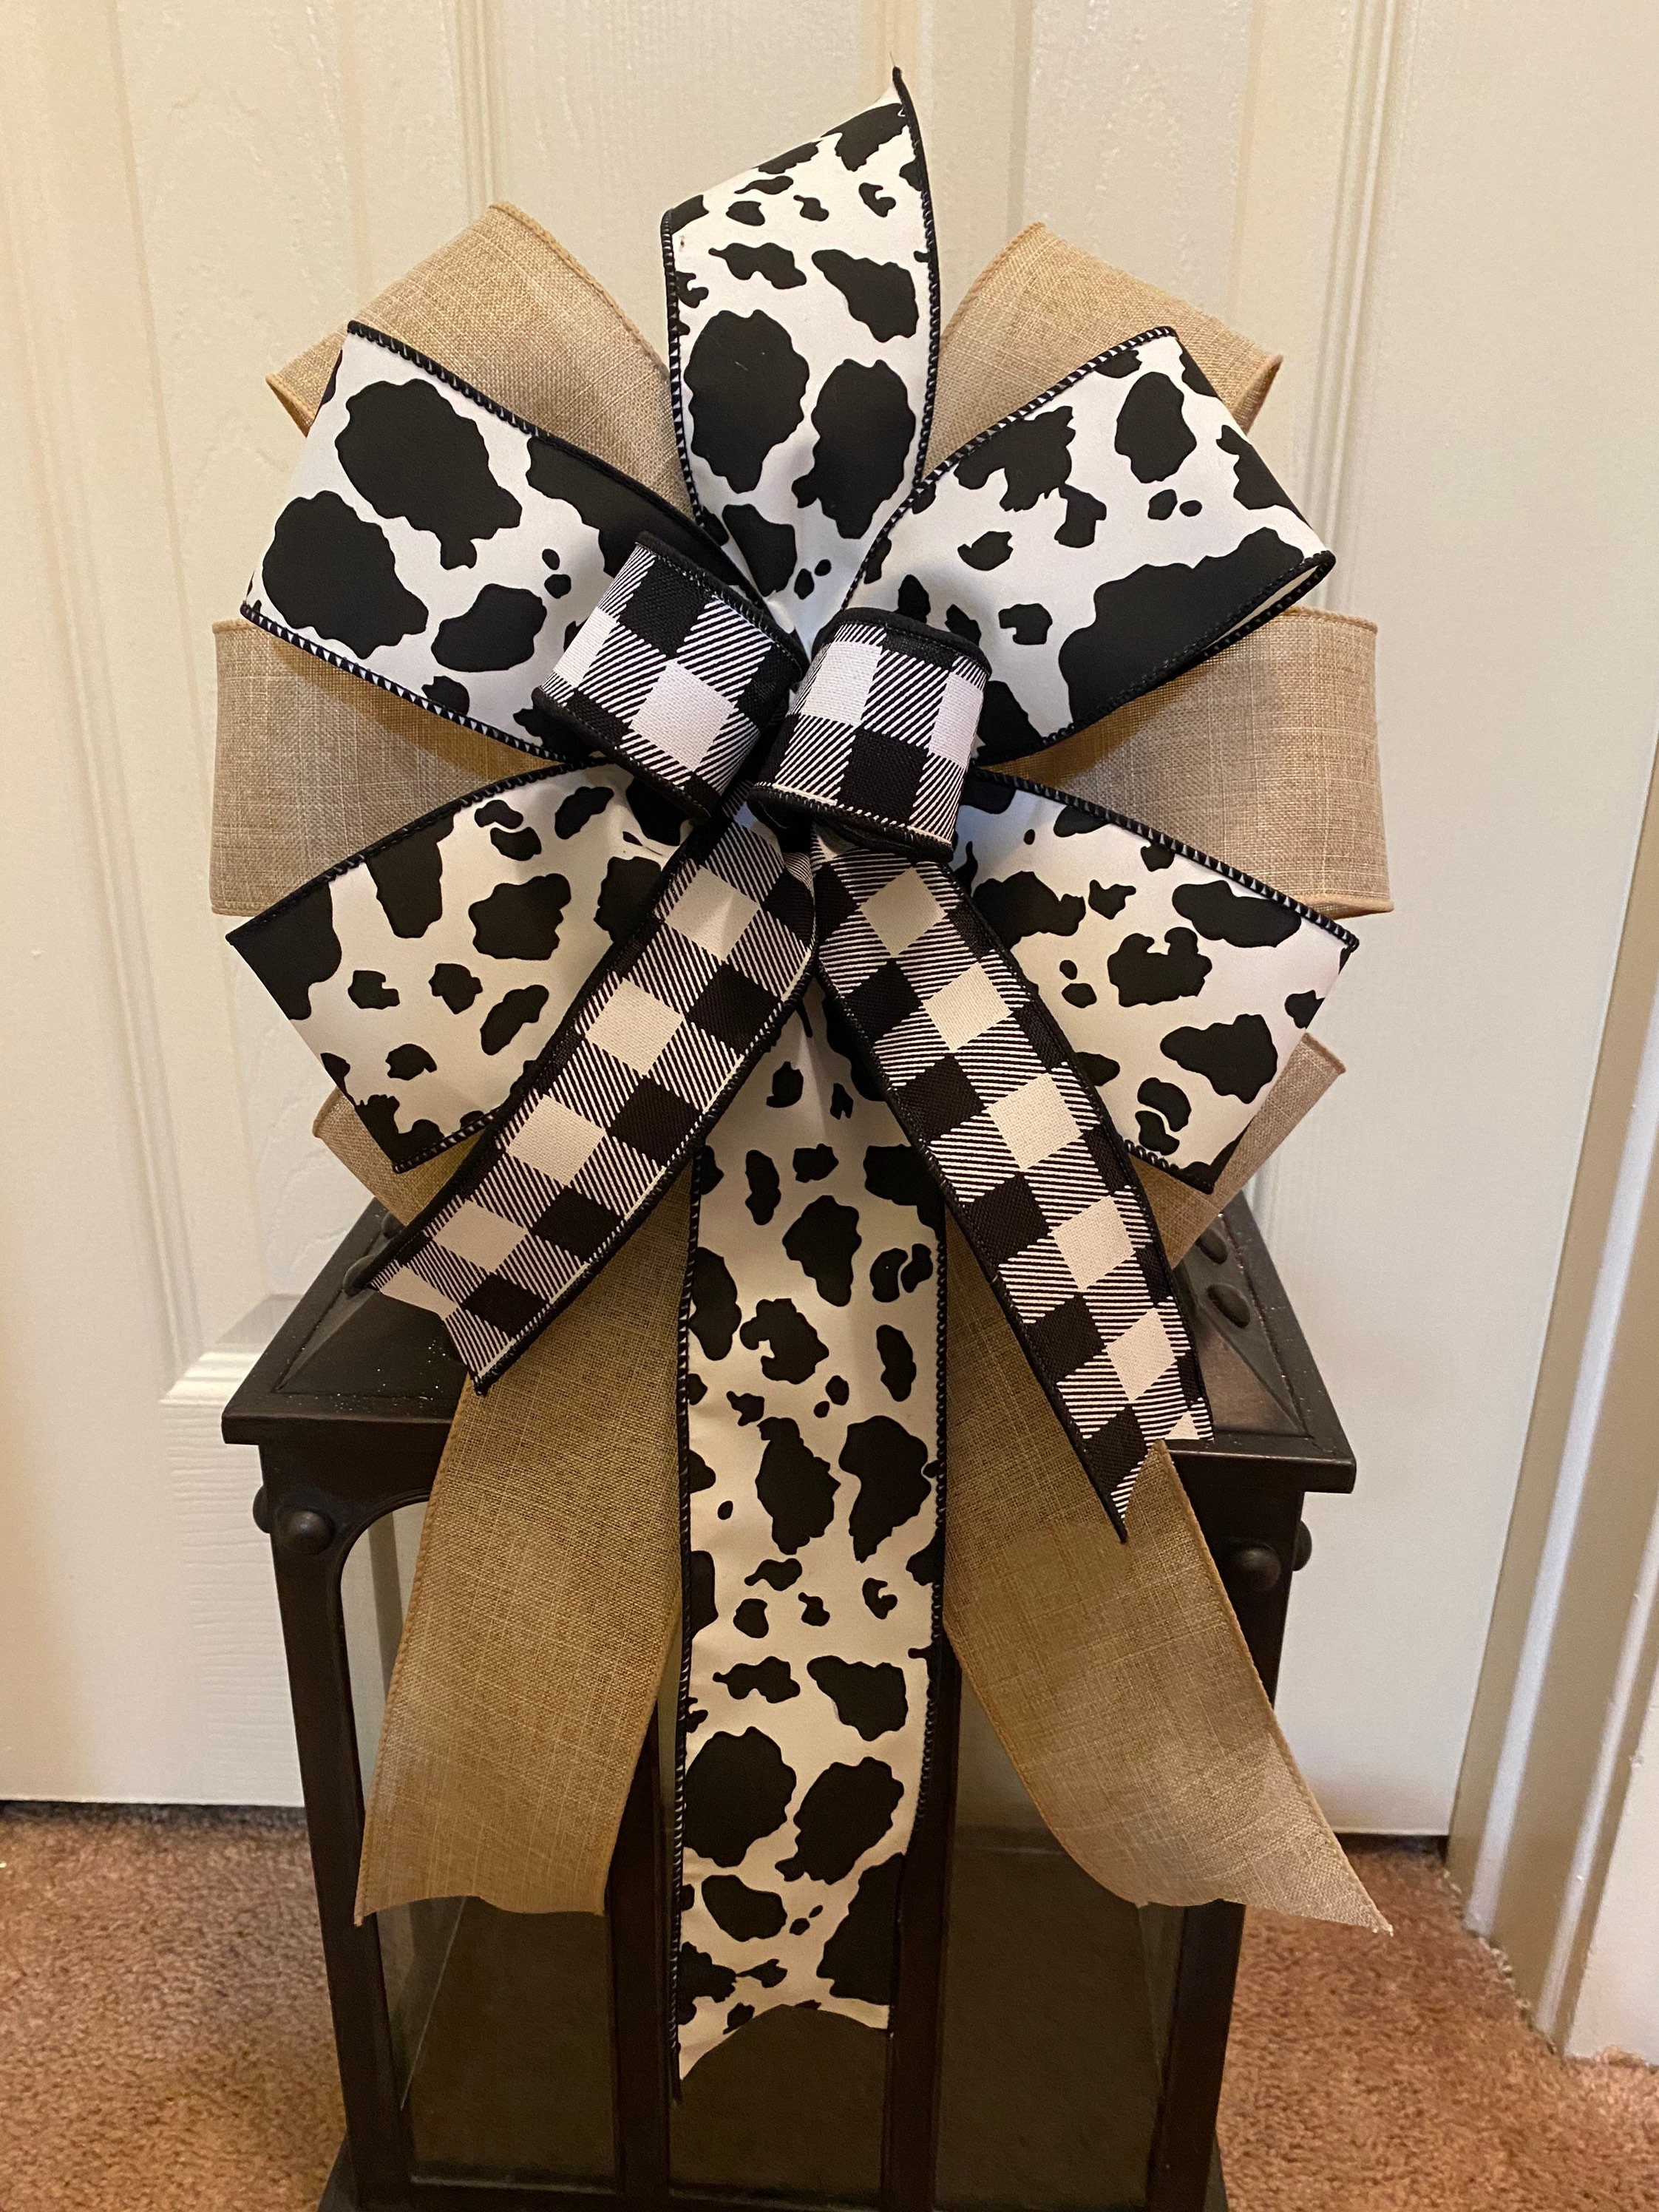 3 Rolls 20 Yards Cow Print Ribbons Wired Edge Burlap White Black Craft  Ribbon Gift Wrapping Ribbon Cowhide Fabric Ribbons for Cow Theme Party  Favor